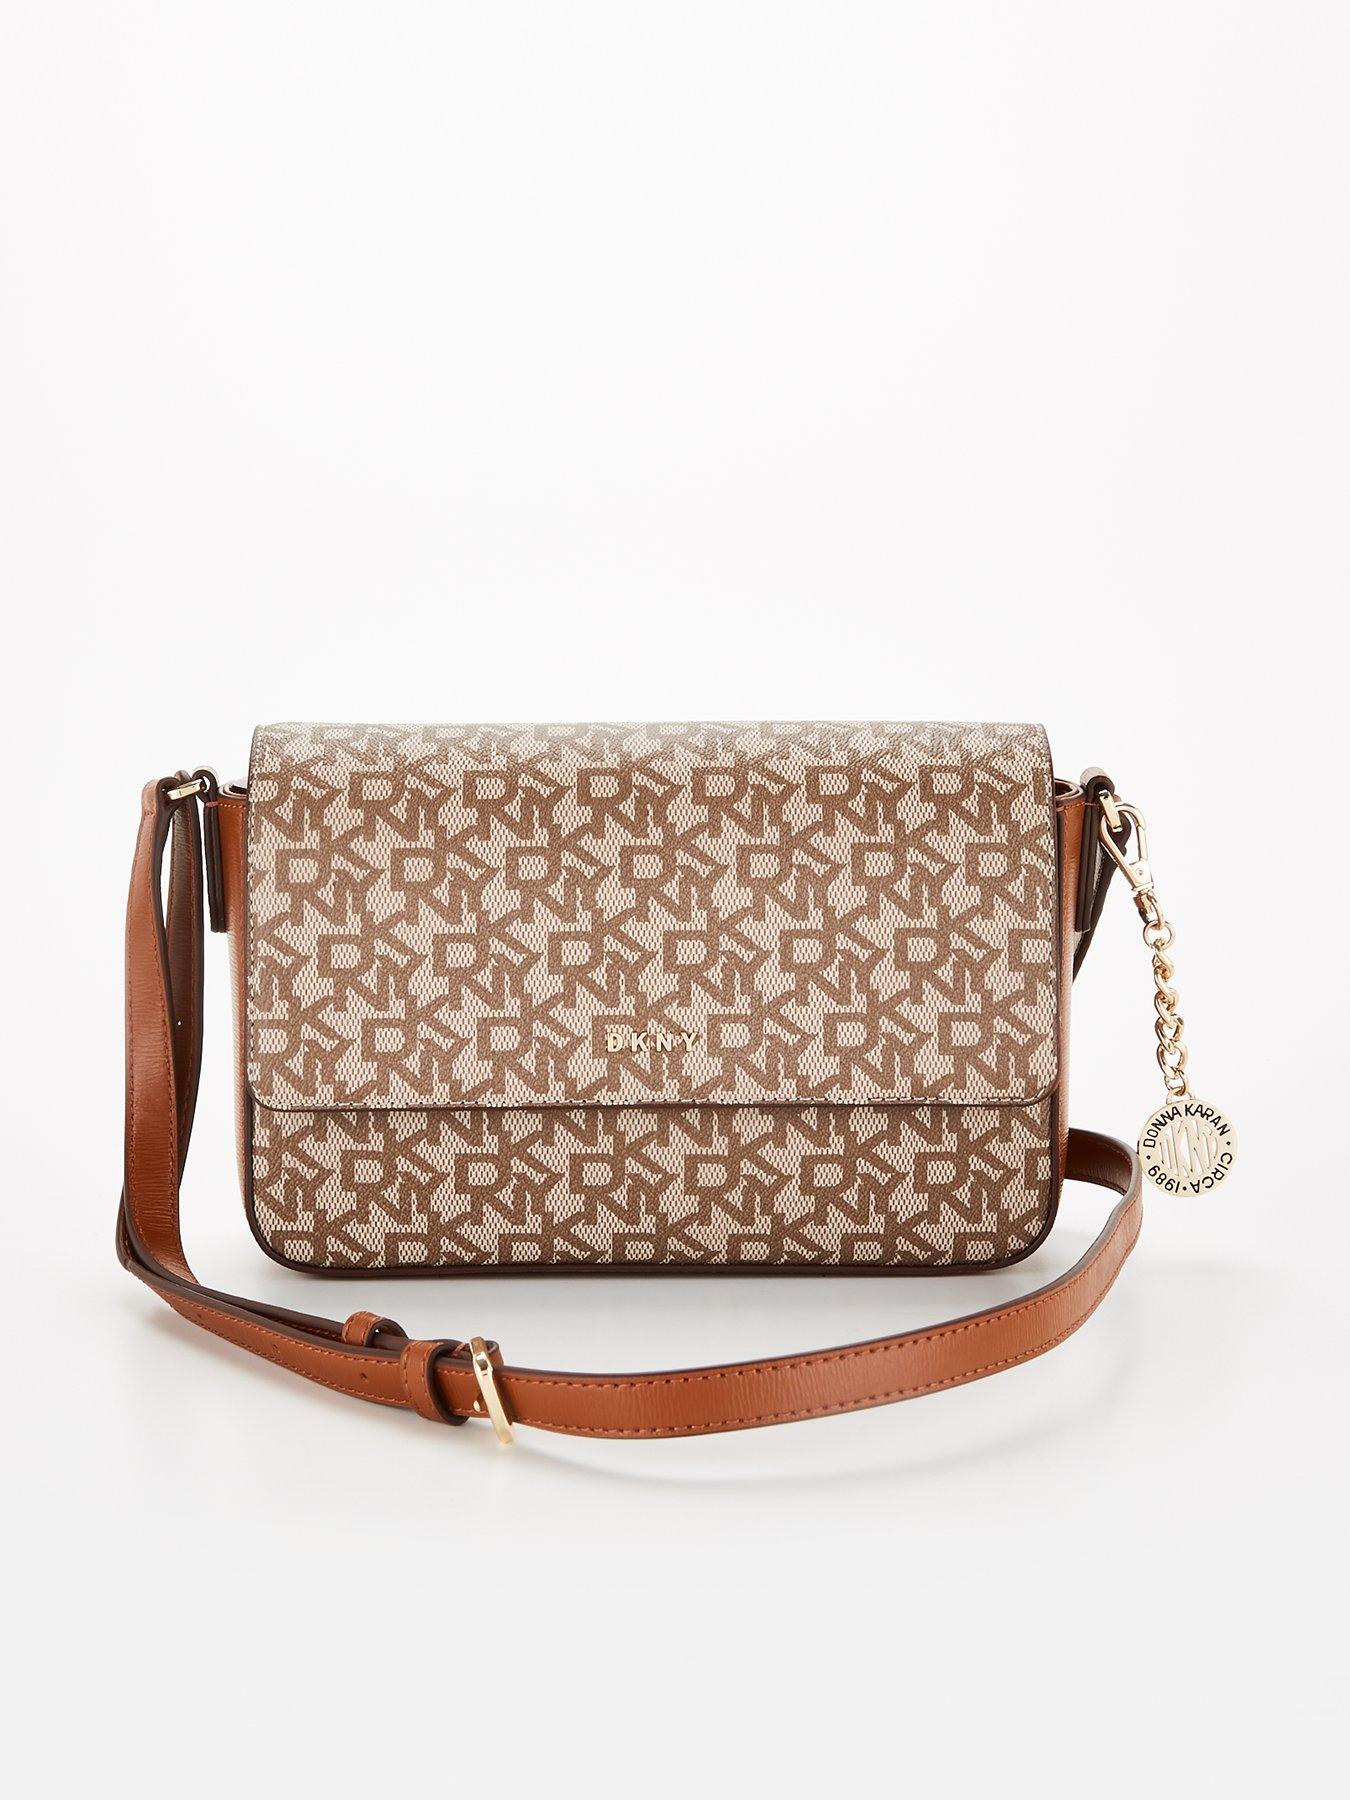 Brown DKNY Bags for Women | Lyst